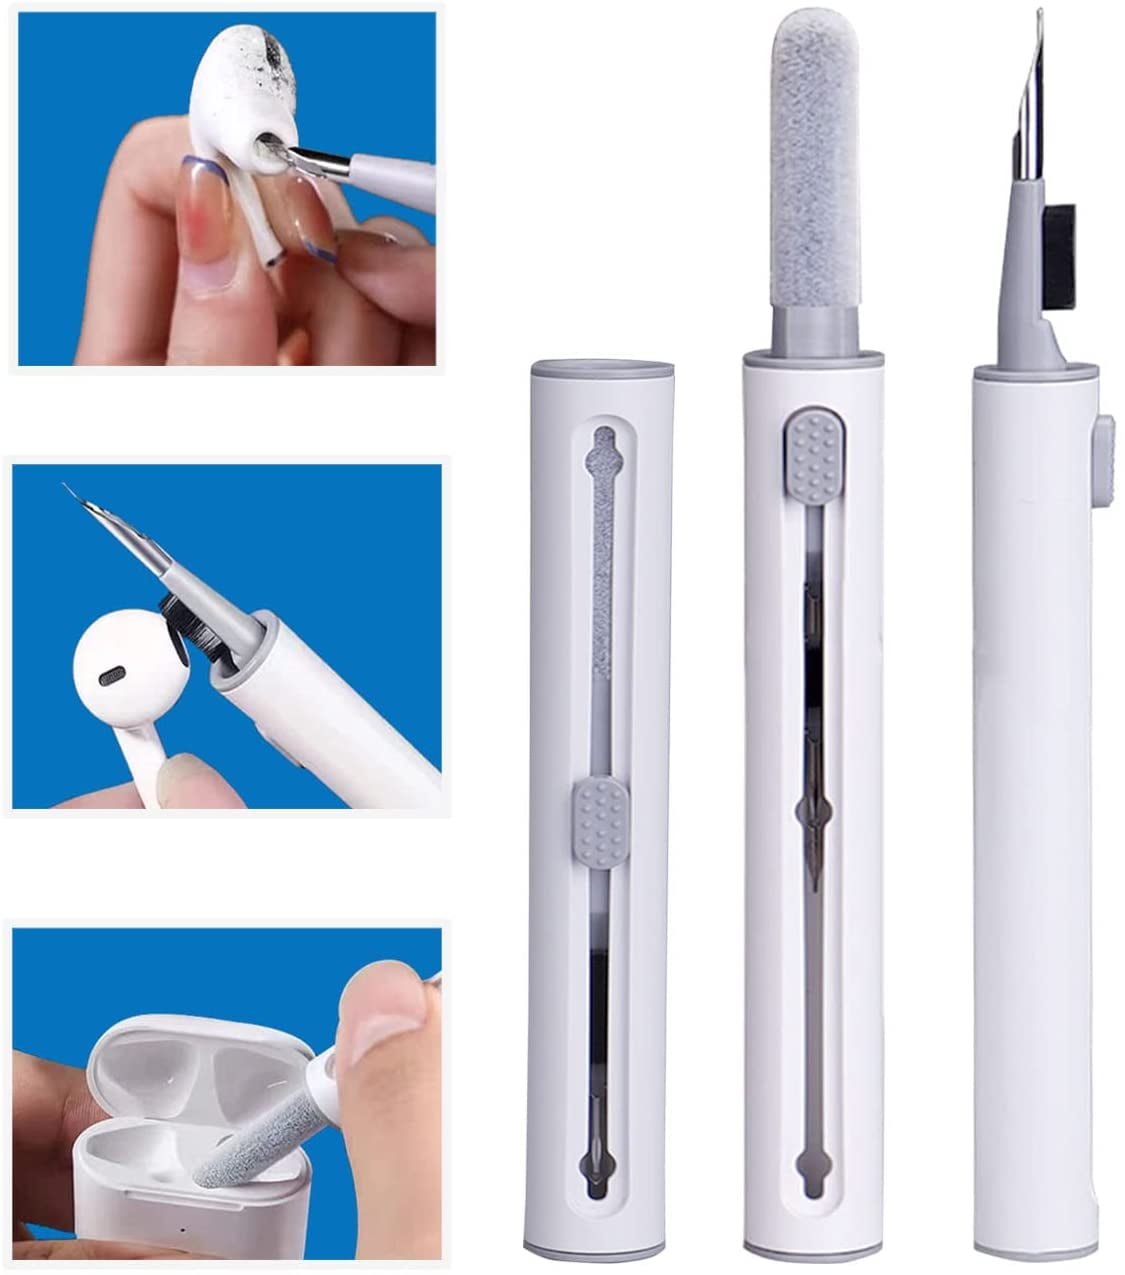 Airpod Cleaner Kit, Cleaning Pen for Airpods Pro 1 2 3, Multifunction  Earphones Cleaner for Wireless Earphones Bluetooth Headphones 